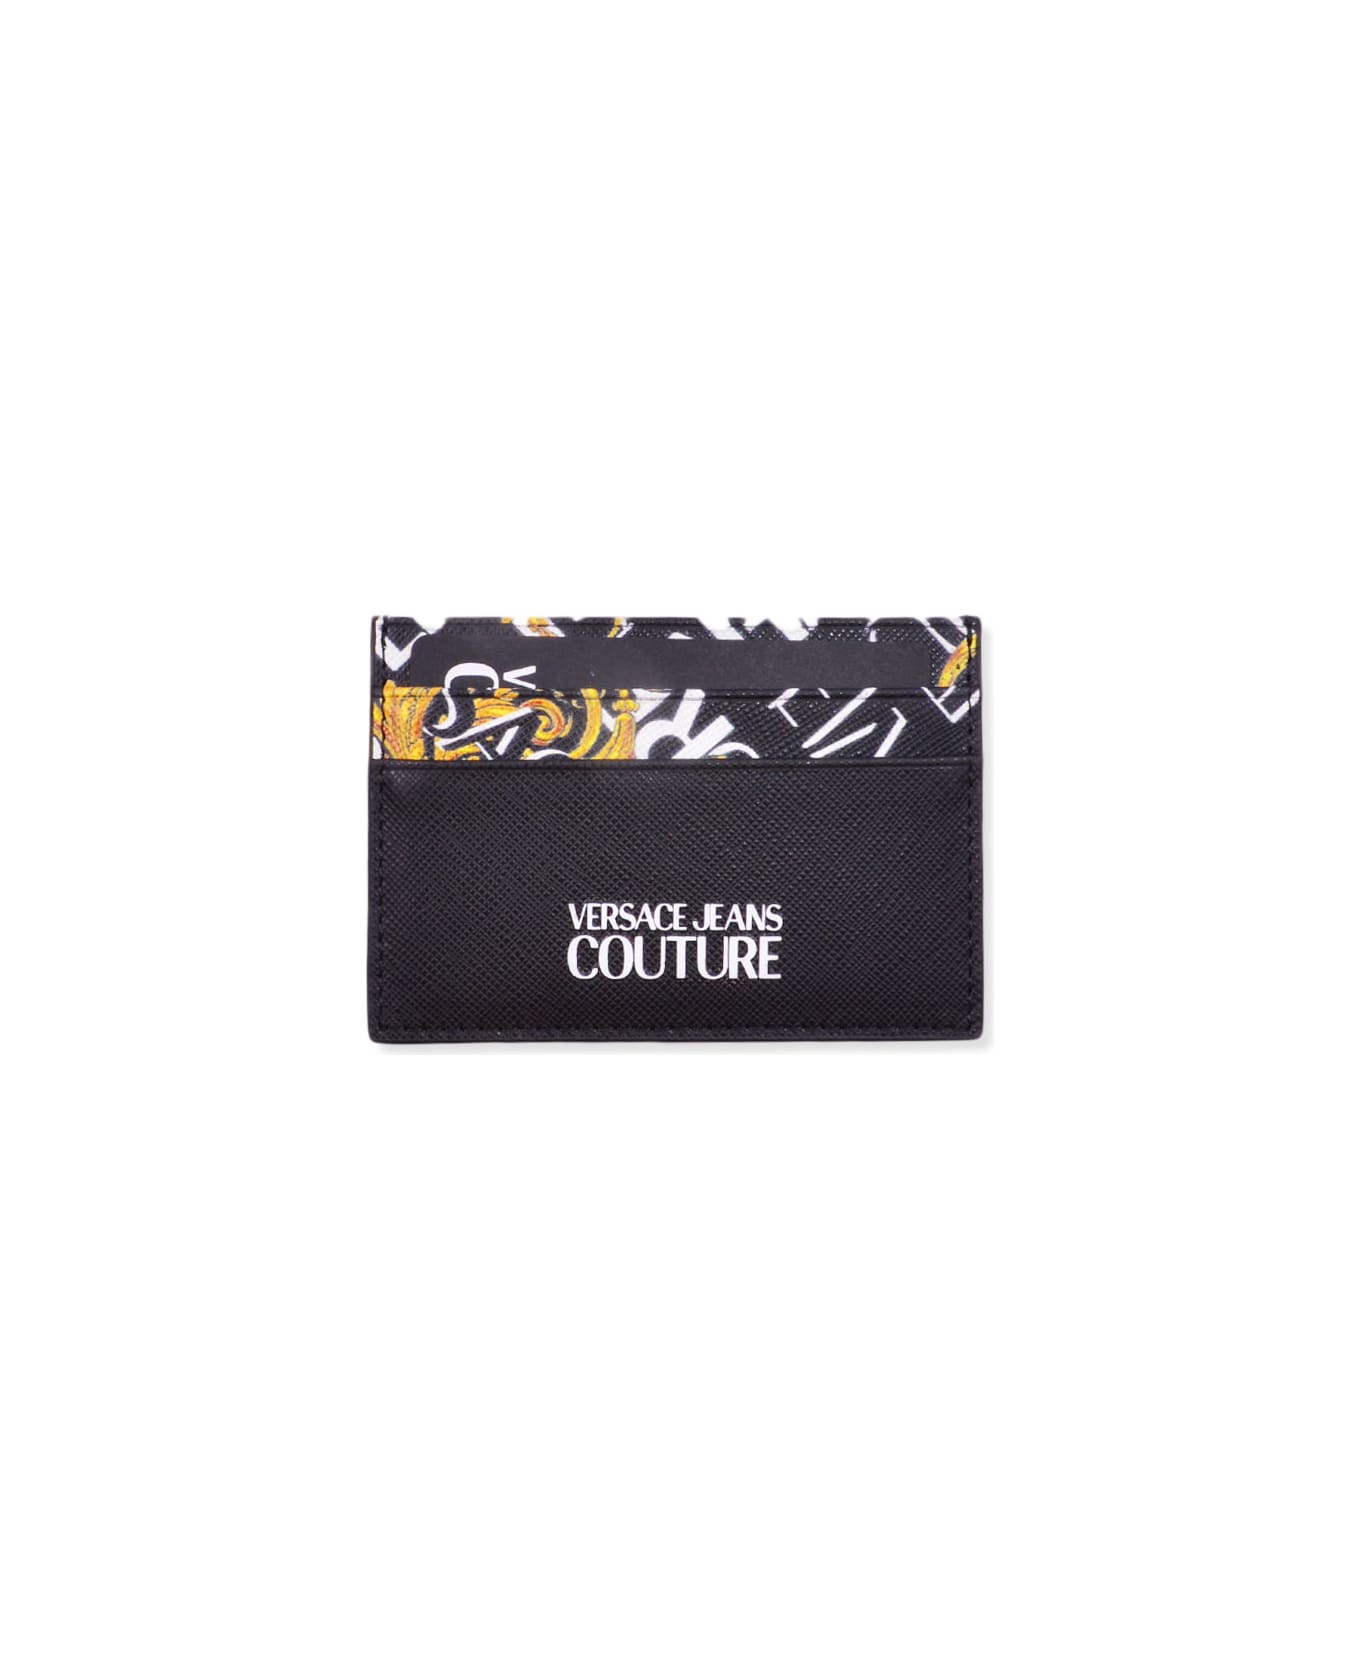 Versace Jeans Couture Leather Card Holder - Black